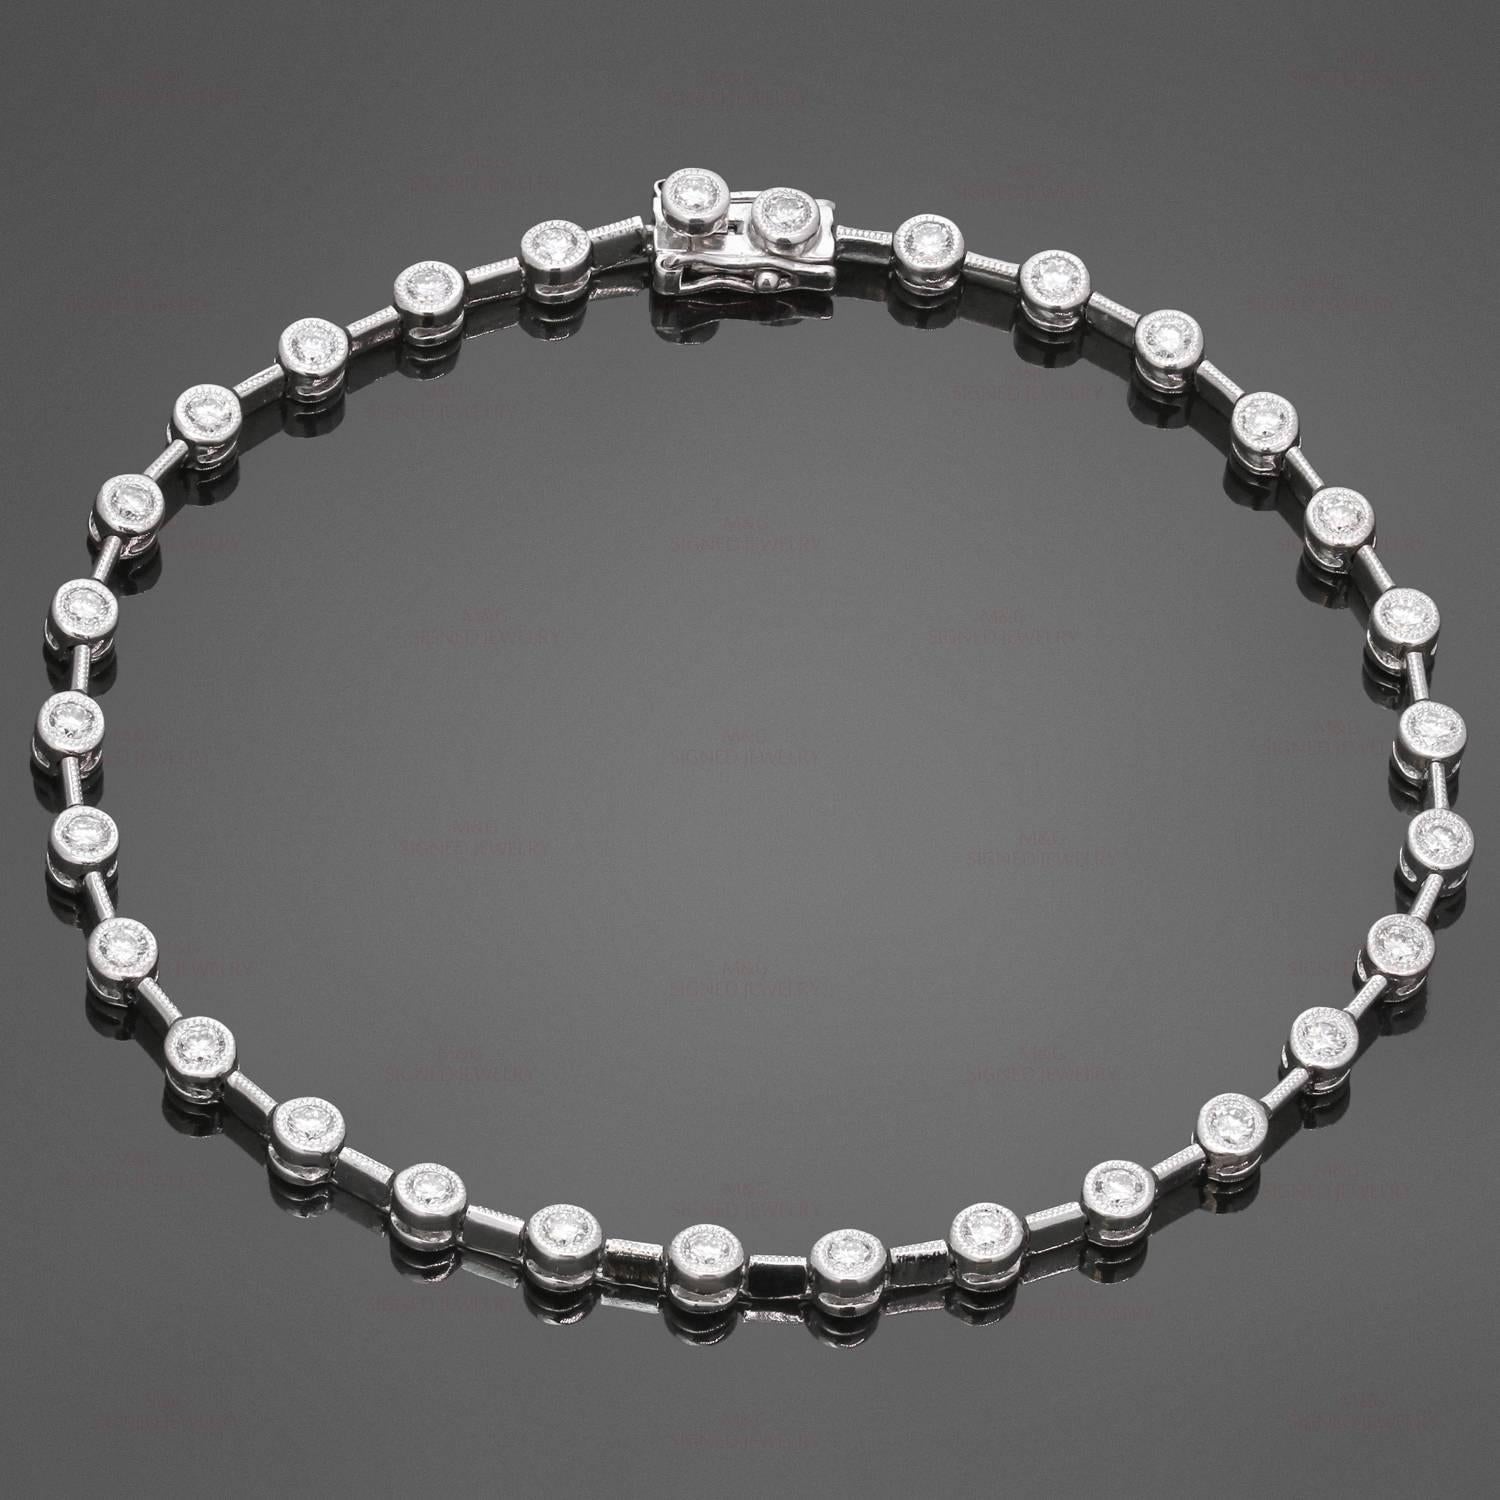 This classic tennis bracelet is crafted 18k white gold and elegantly bezel-set with brilliant-cut round diamonds of an estimated 1.50 carats. Made in United States circa 1990s. Measurements: 0.11" (3mm) width, 7.5" (19.5cm) length. 